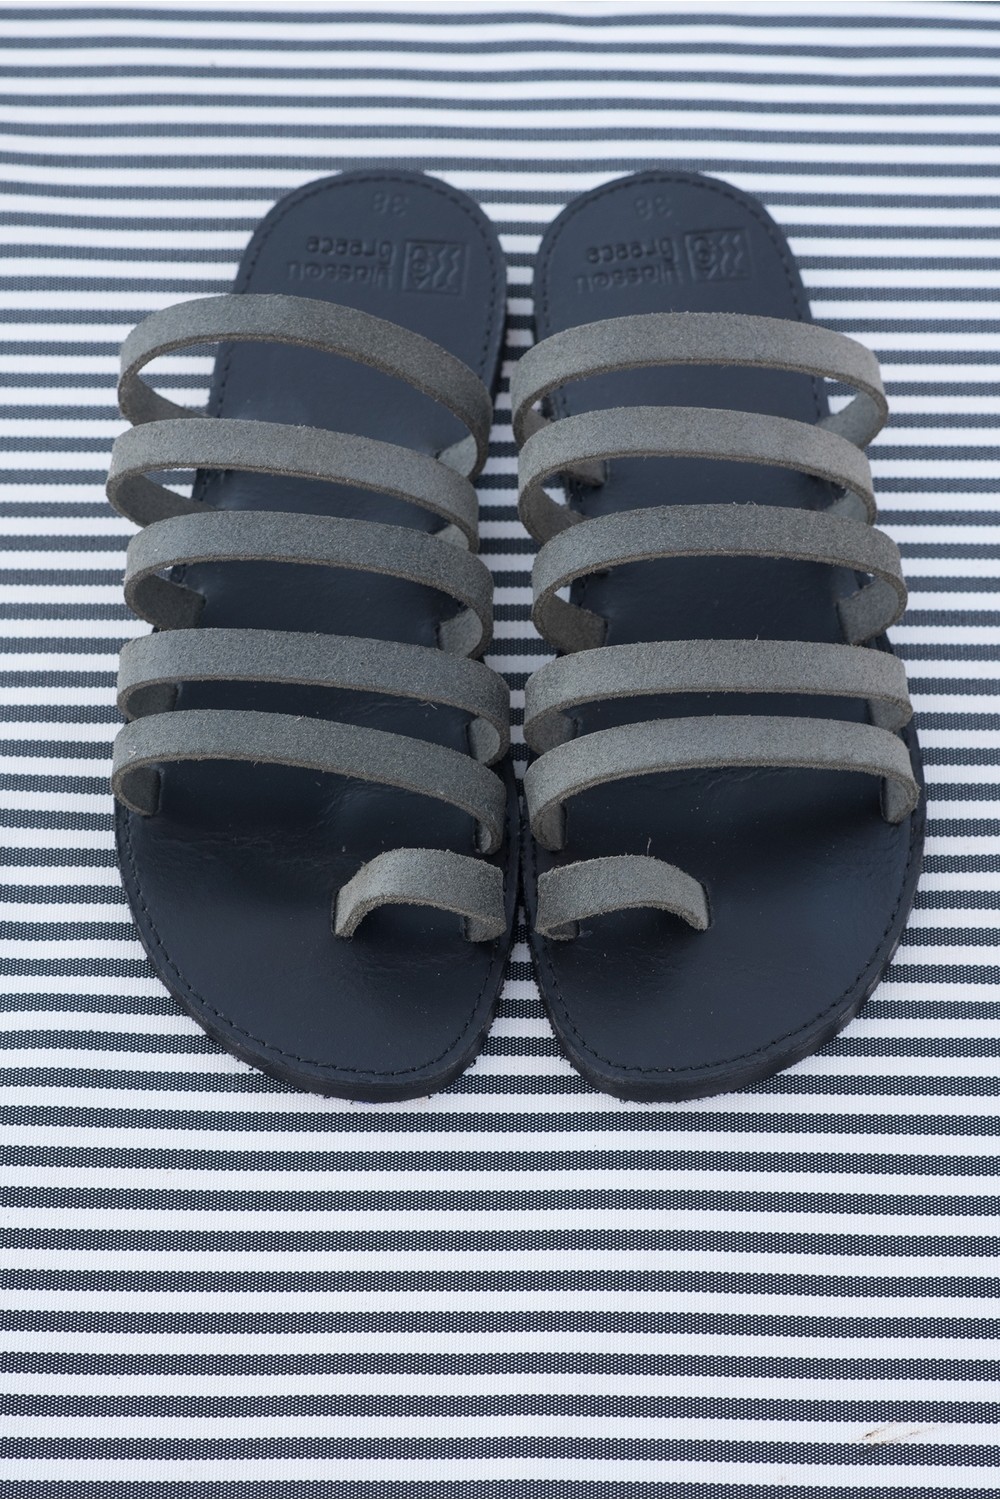 WOMEN'S LEATHER "SUEDE GREY STRIPES" 